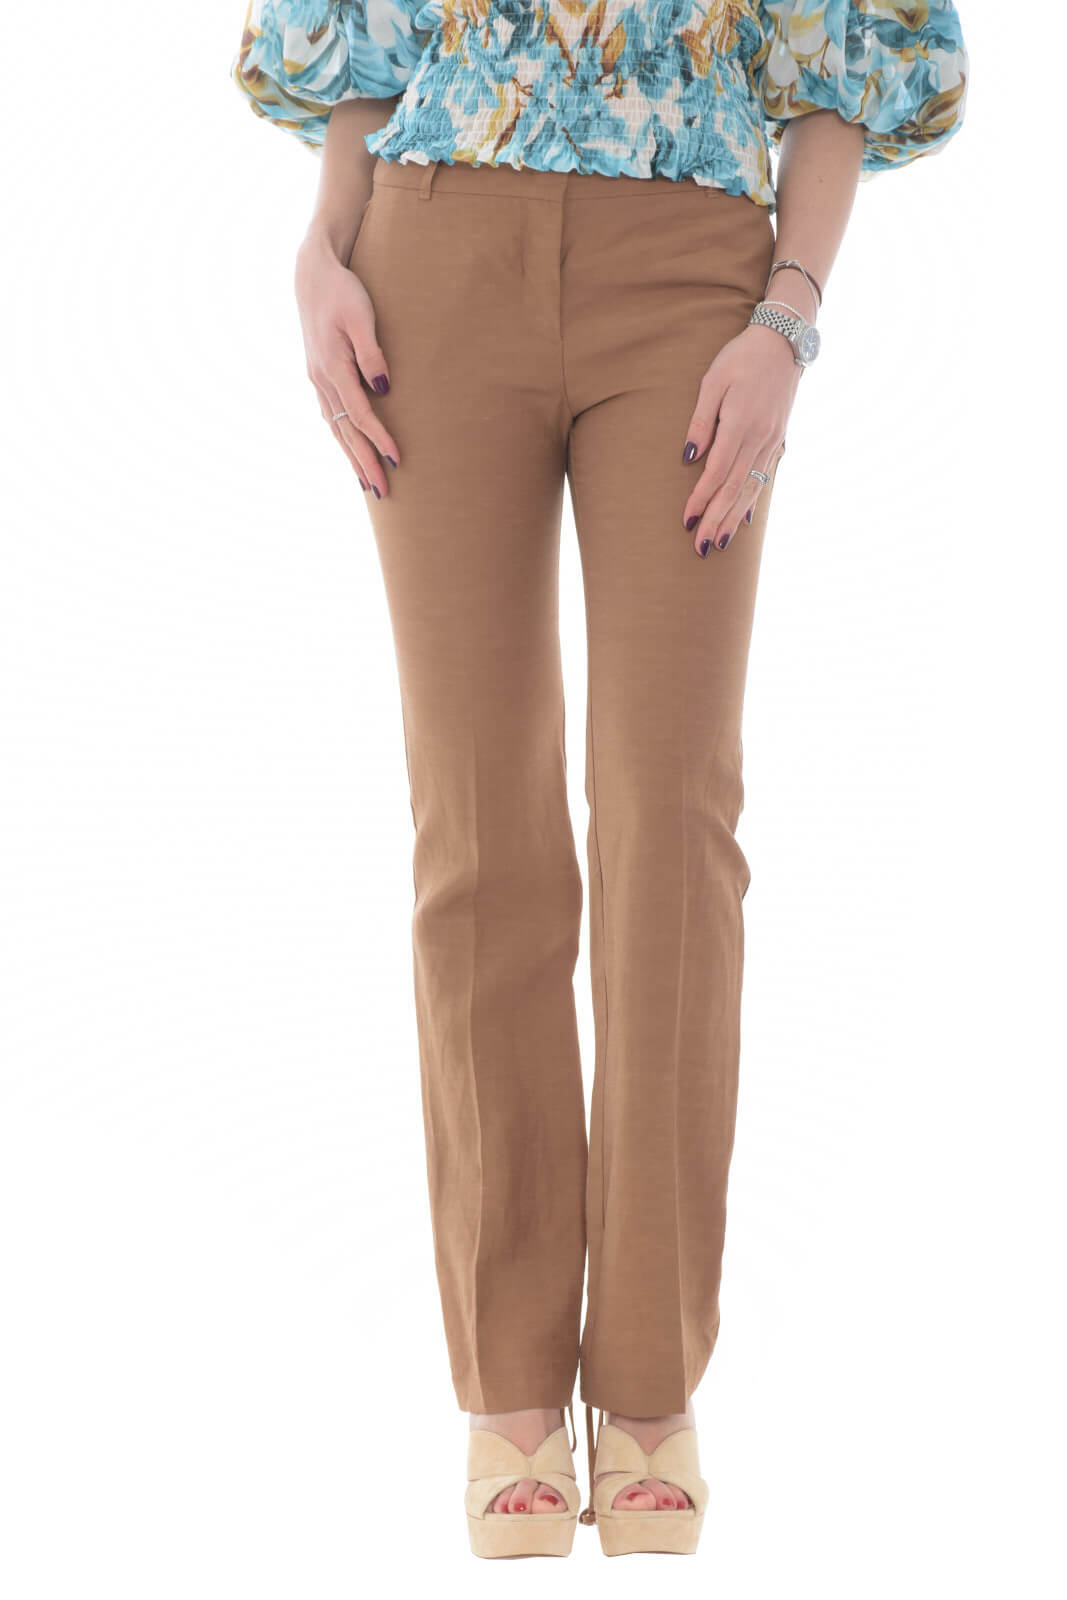 Blugirl Women's trousers with lace closure on the bottom